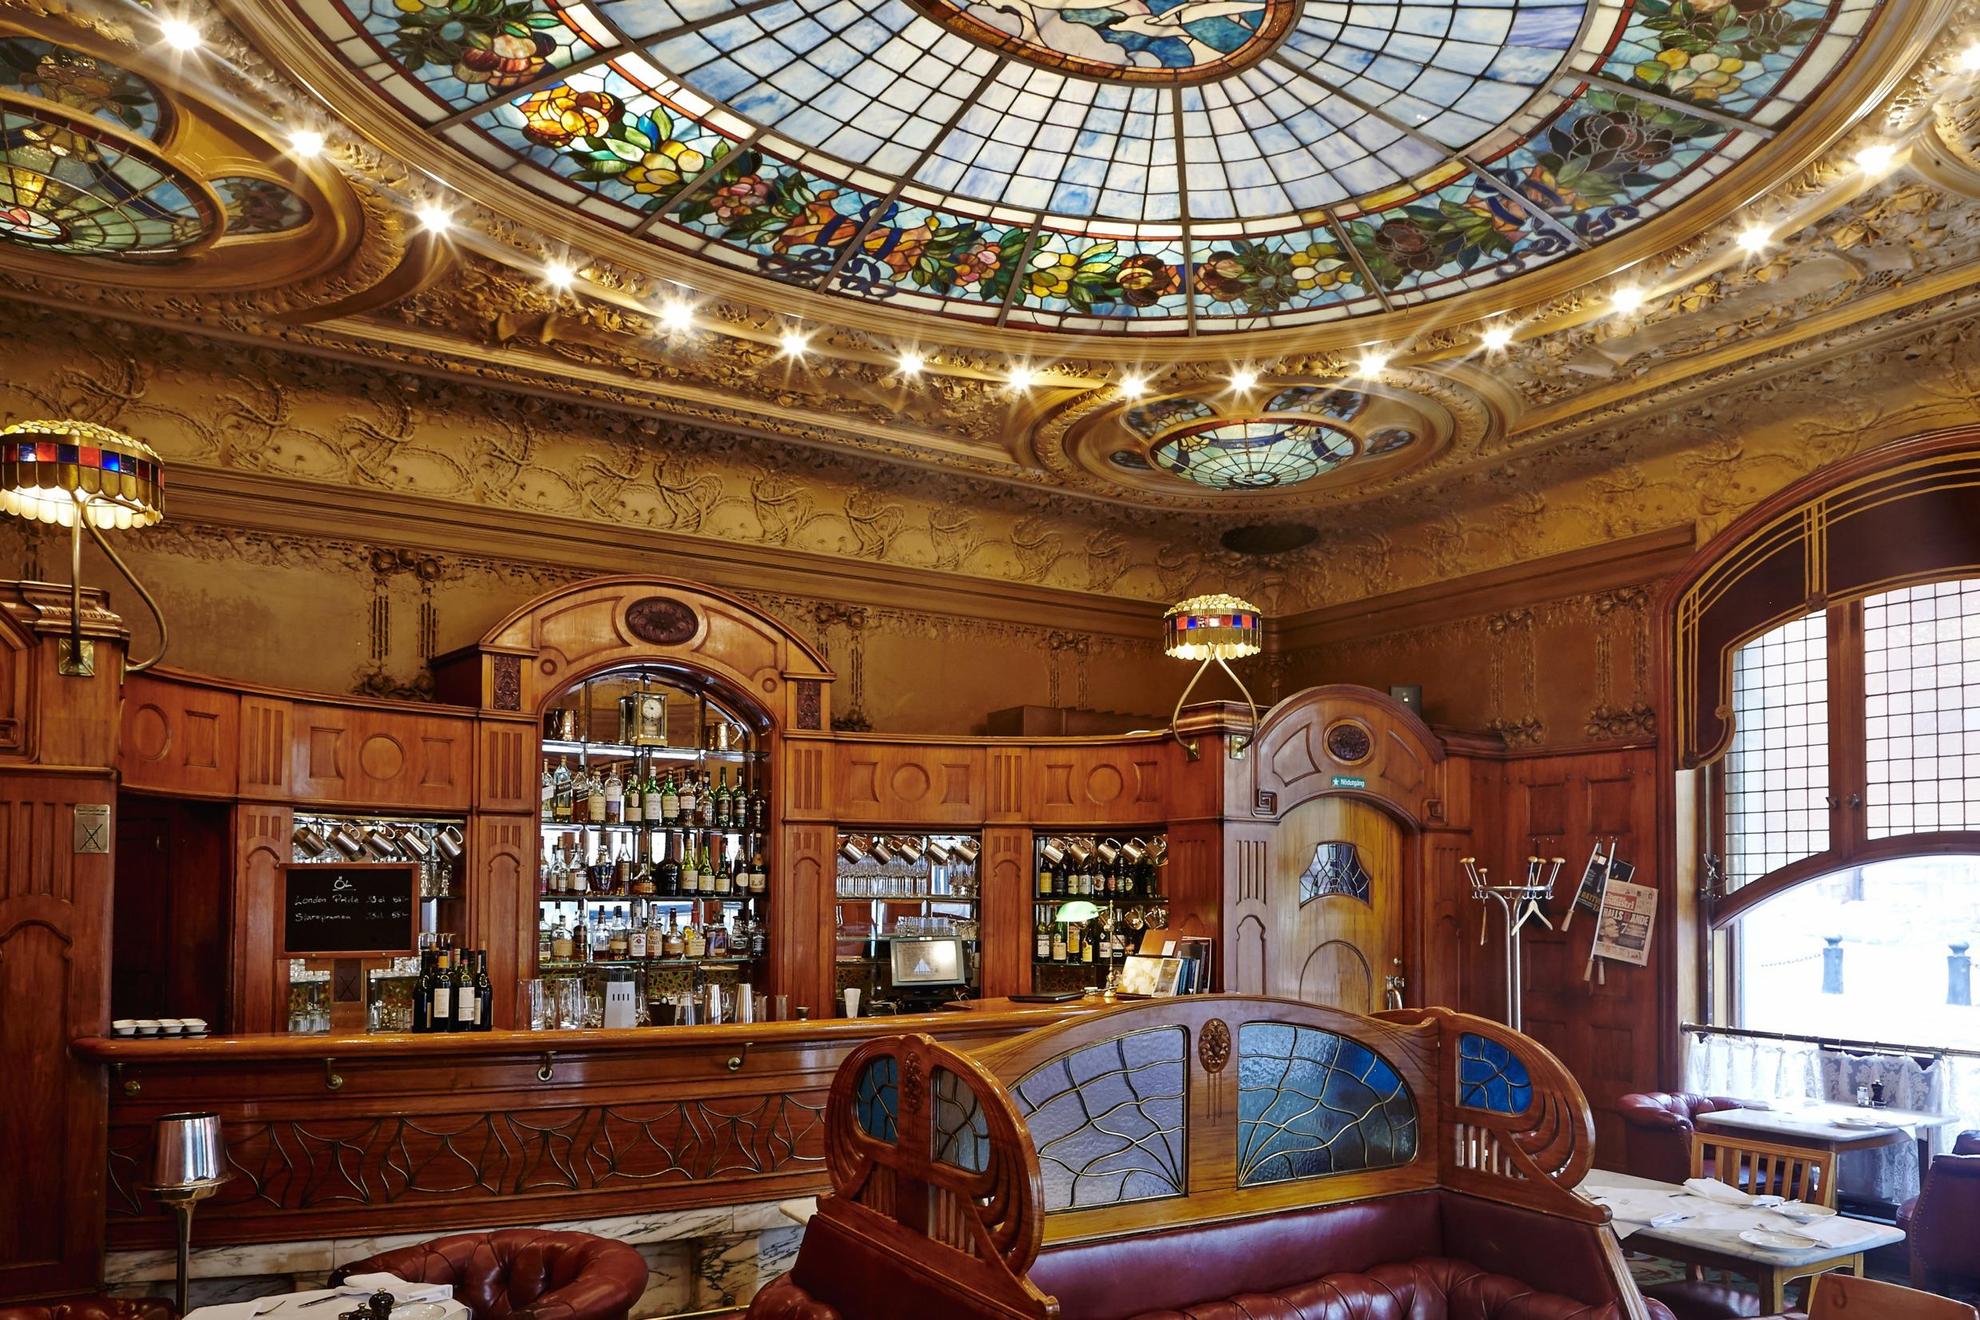 The interior of Operabaren restaurant in Stockholm, with wood ornaments and a decorative glass ceiling.